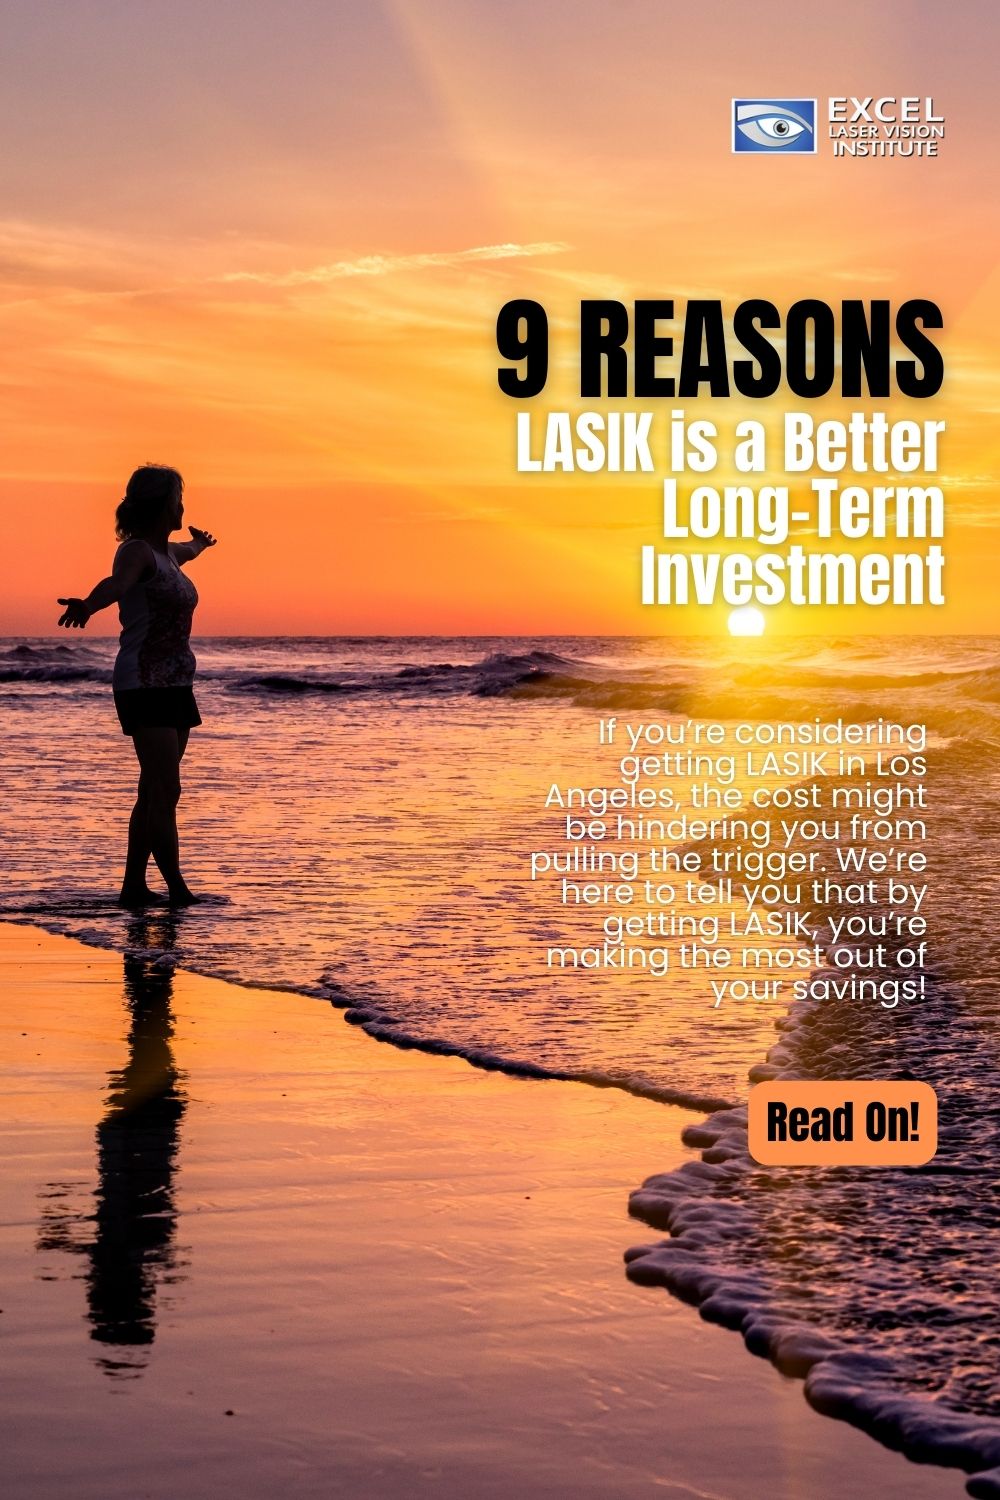 9 Reasons LASIK Los Angeles is a Better Long-Term Investment